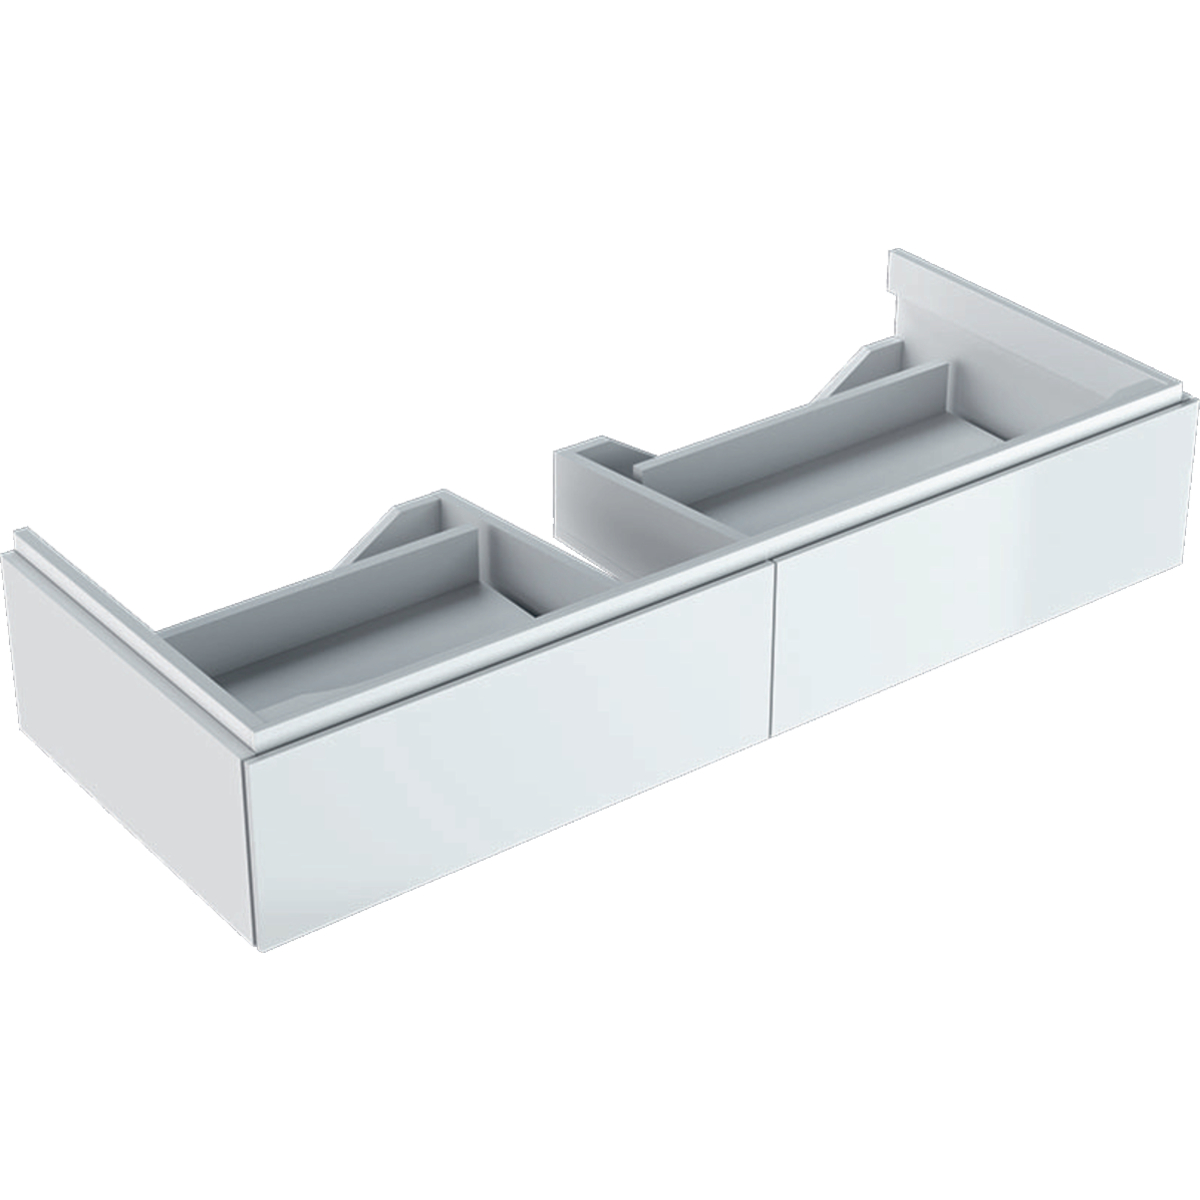 Geberit 500517011 Xeno2 1200mm Vanity Unit with Two Drawers & LED Lighting - White (Basin or Brassware NOT Included)